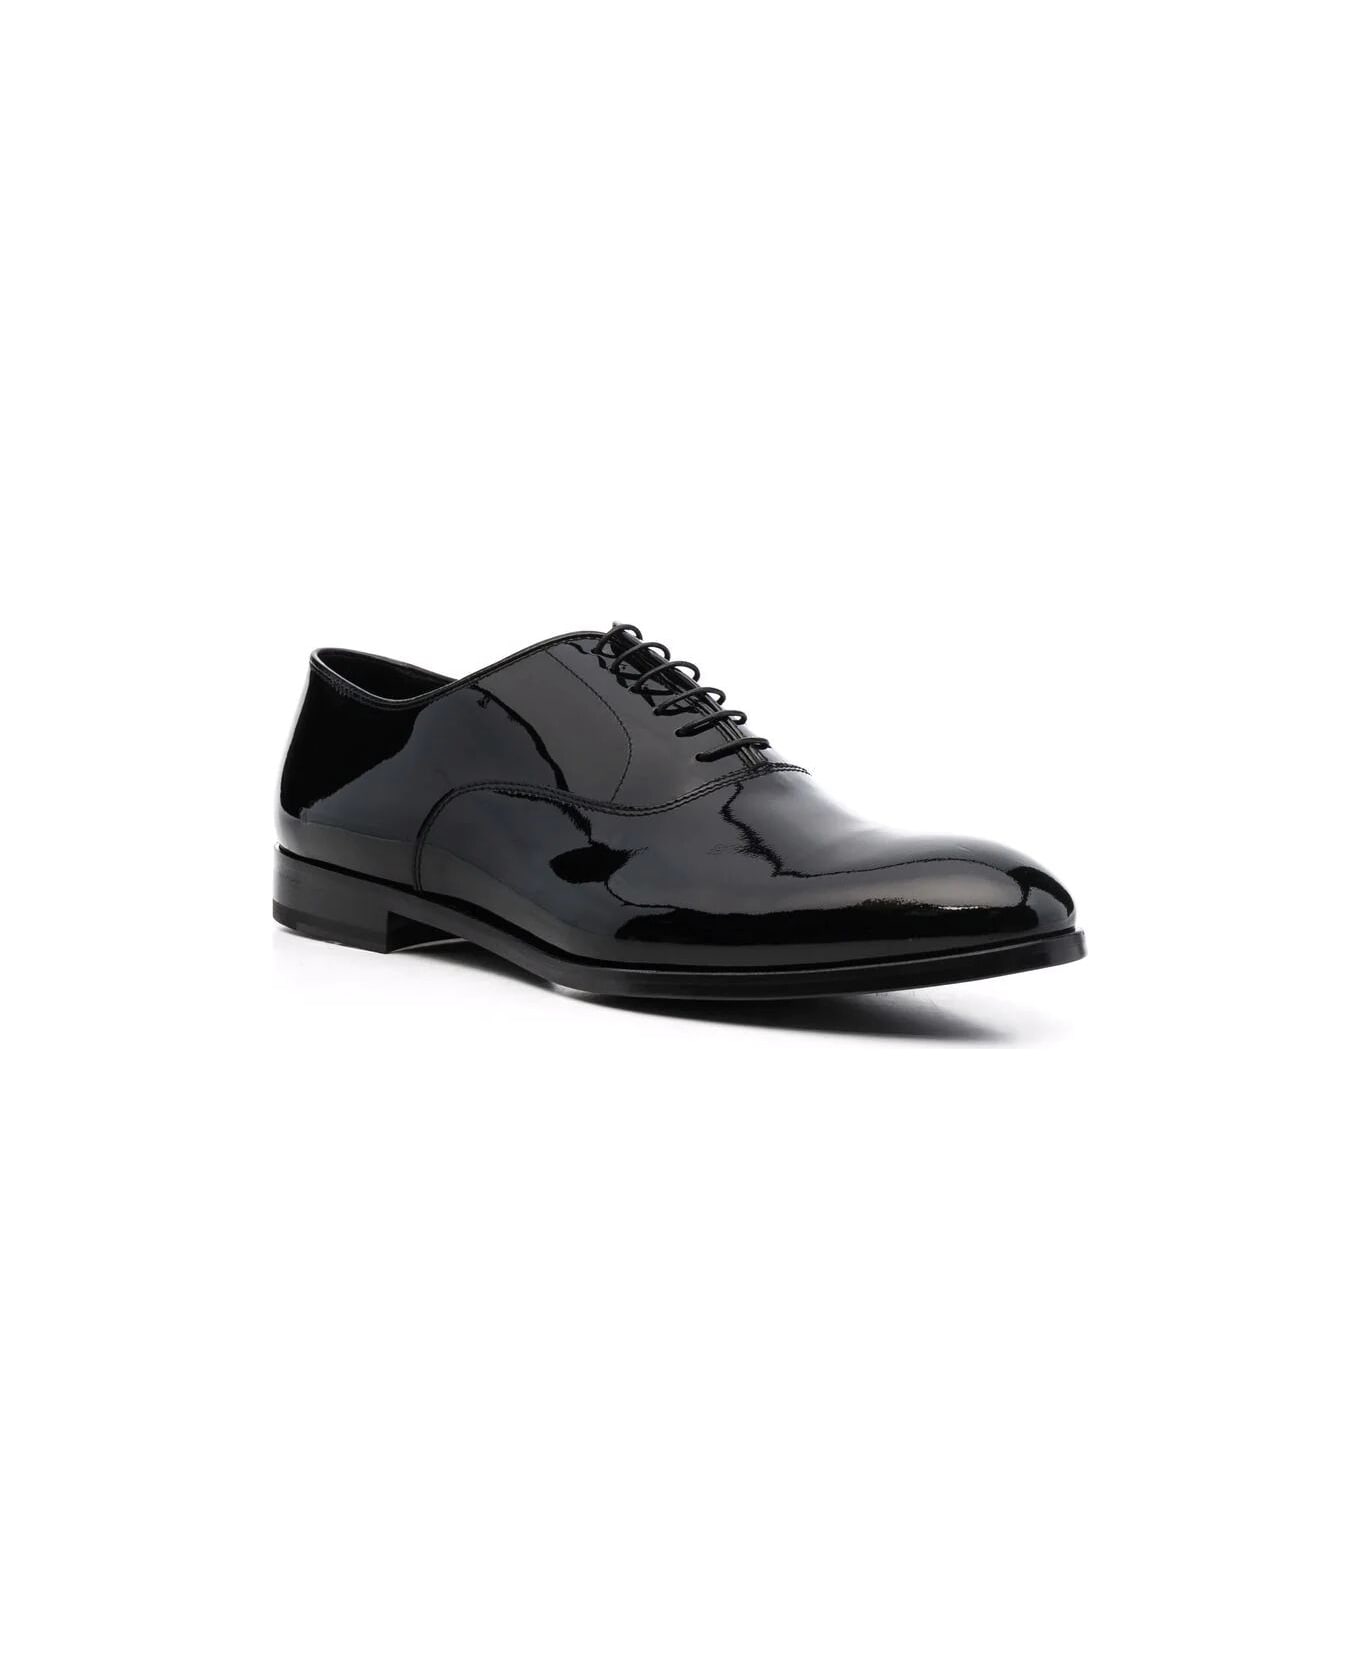 Doucal's Oxford Lace Up Shoes - Black